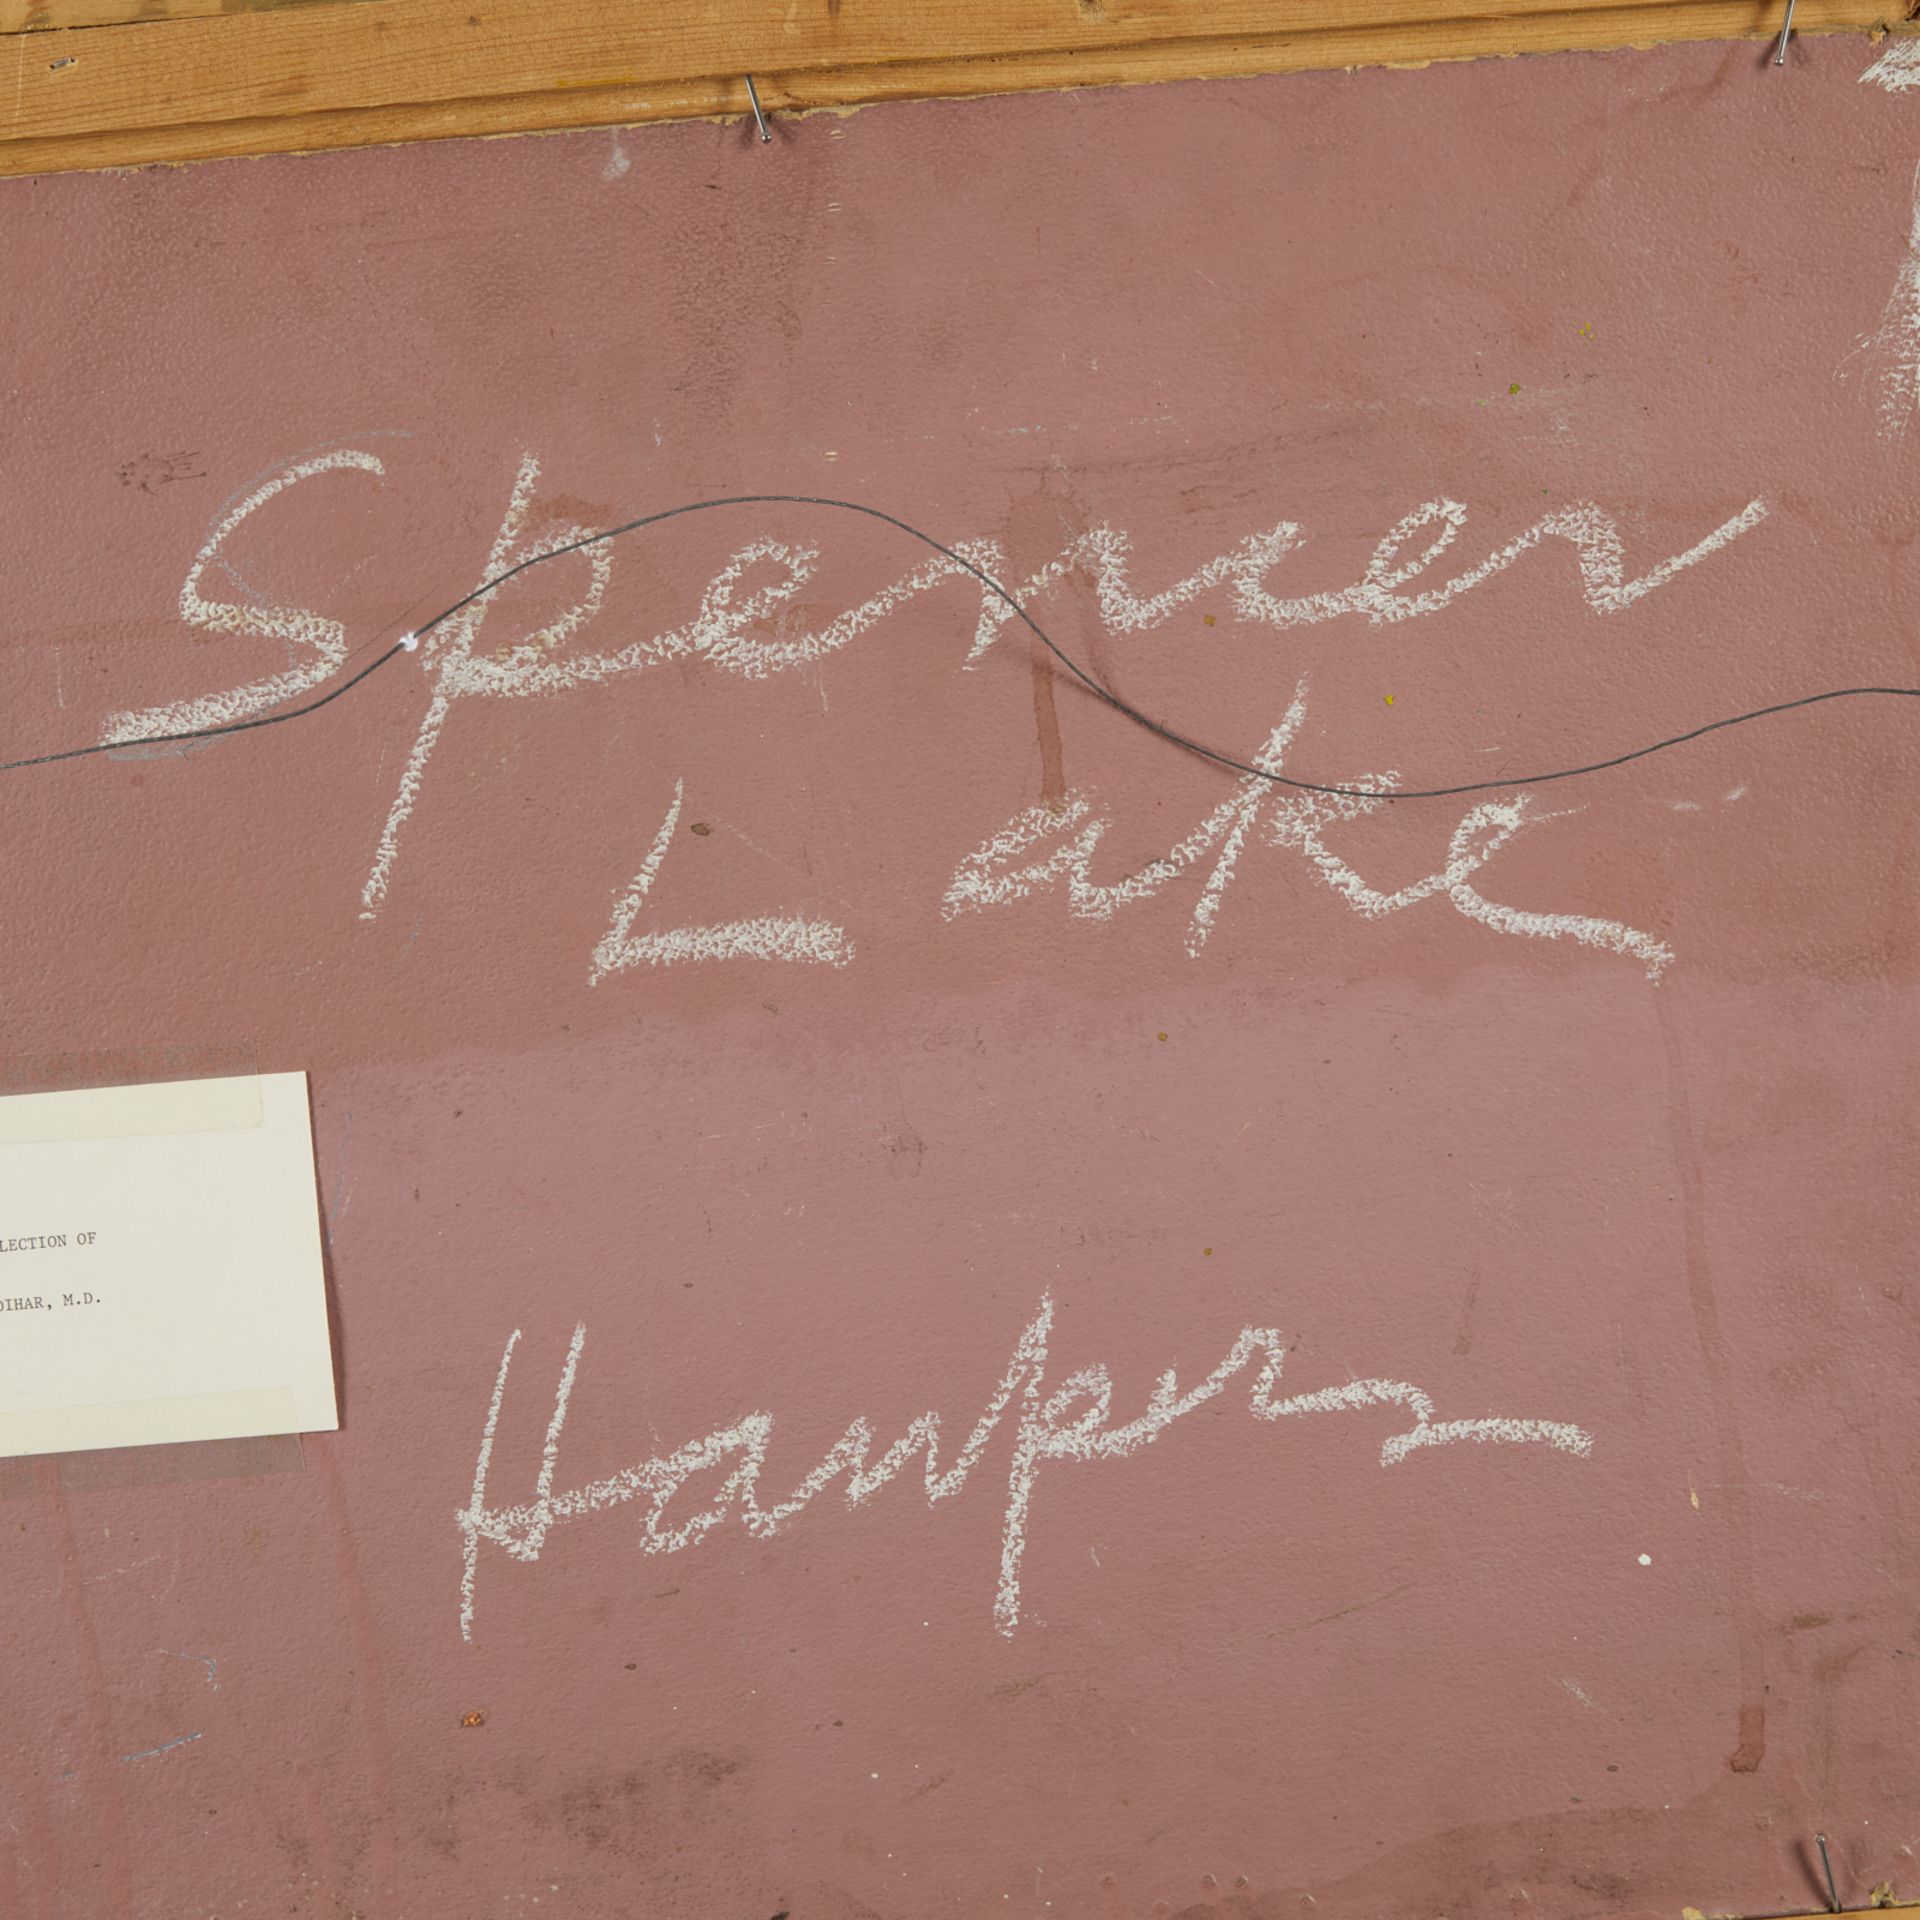 Clement Haupers "Spencer Lake" Painting 1956 - Image 7 of 8